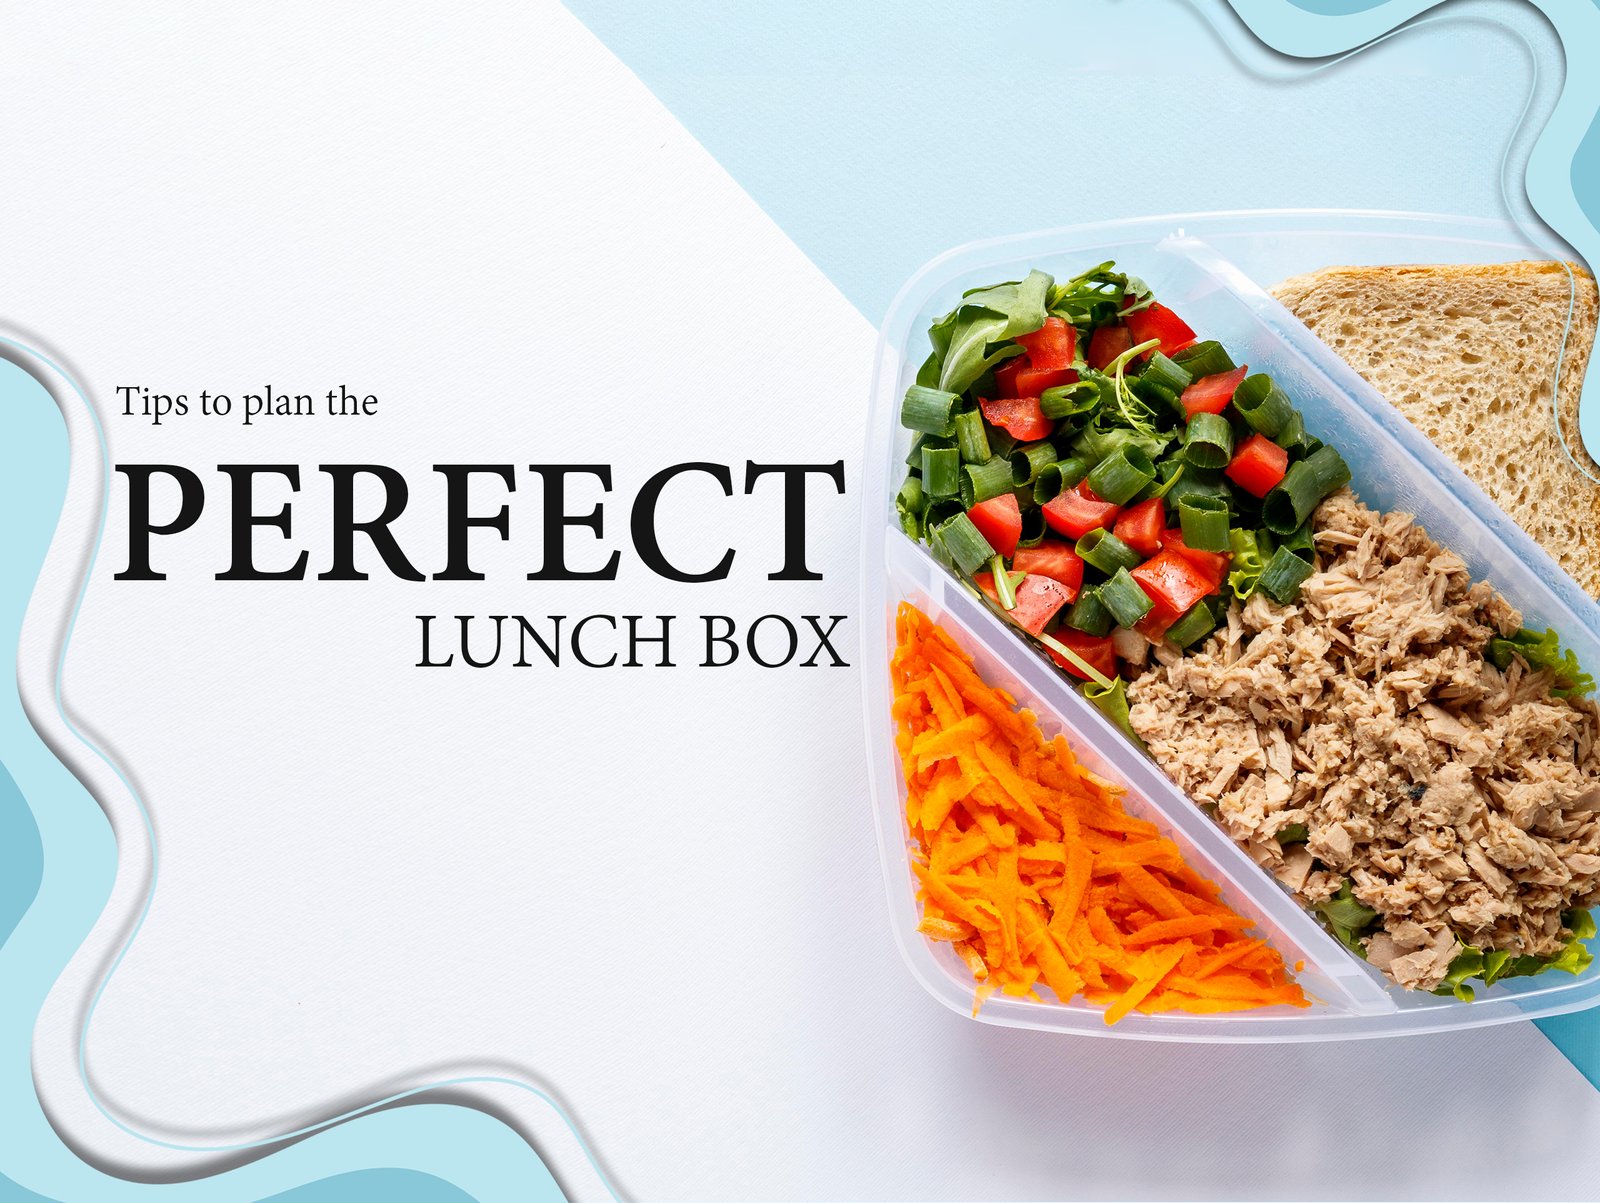 Tips to plan the perfect lunch box poster